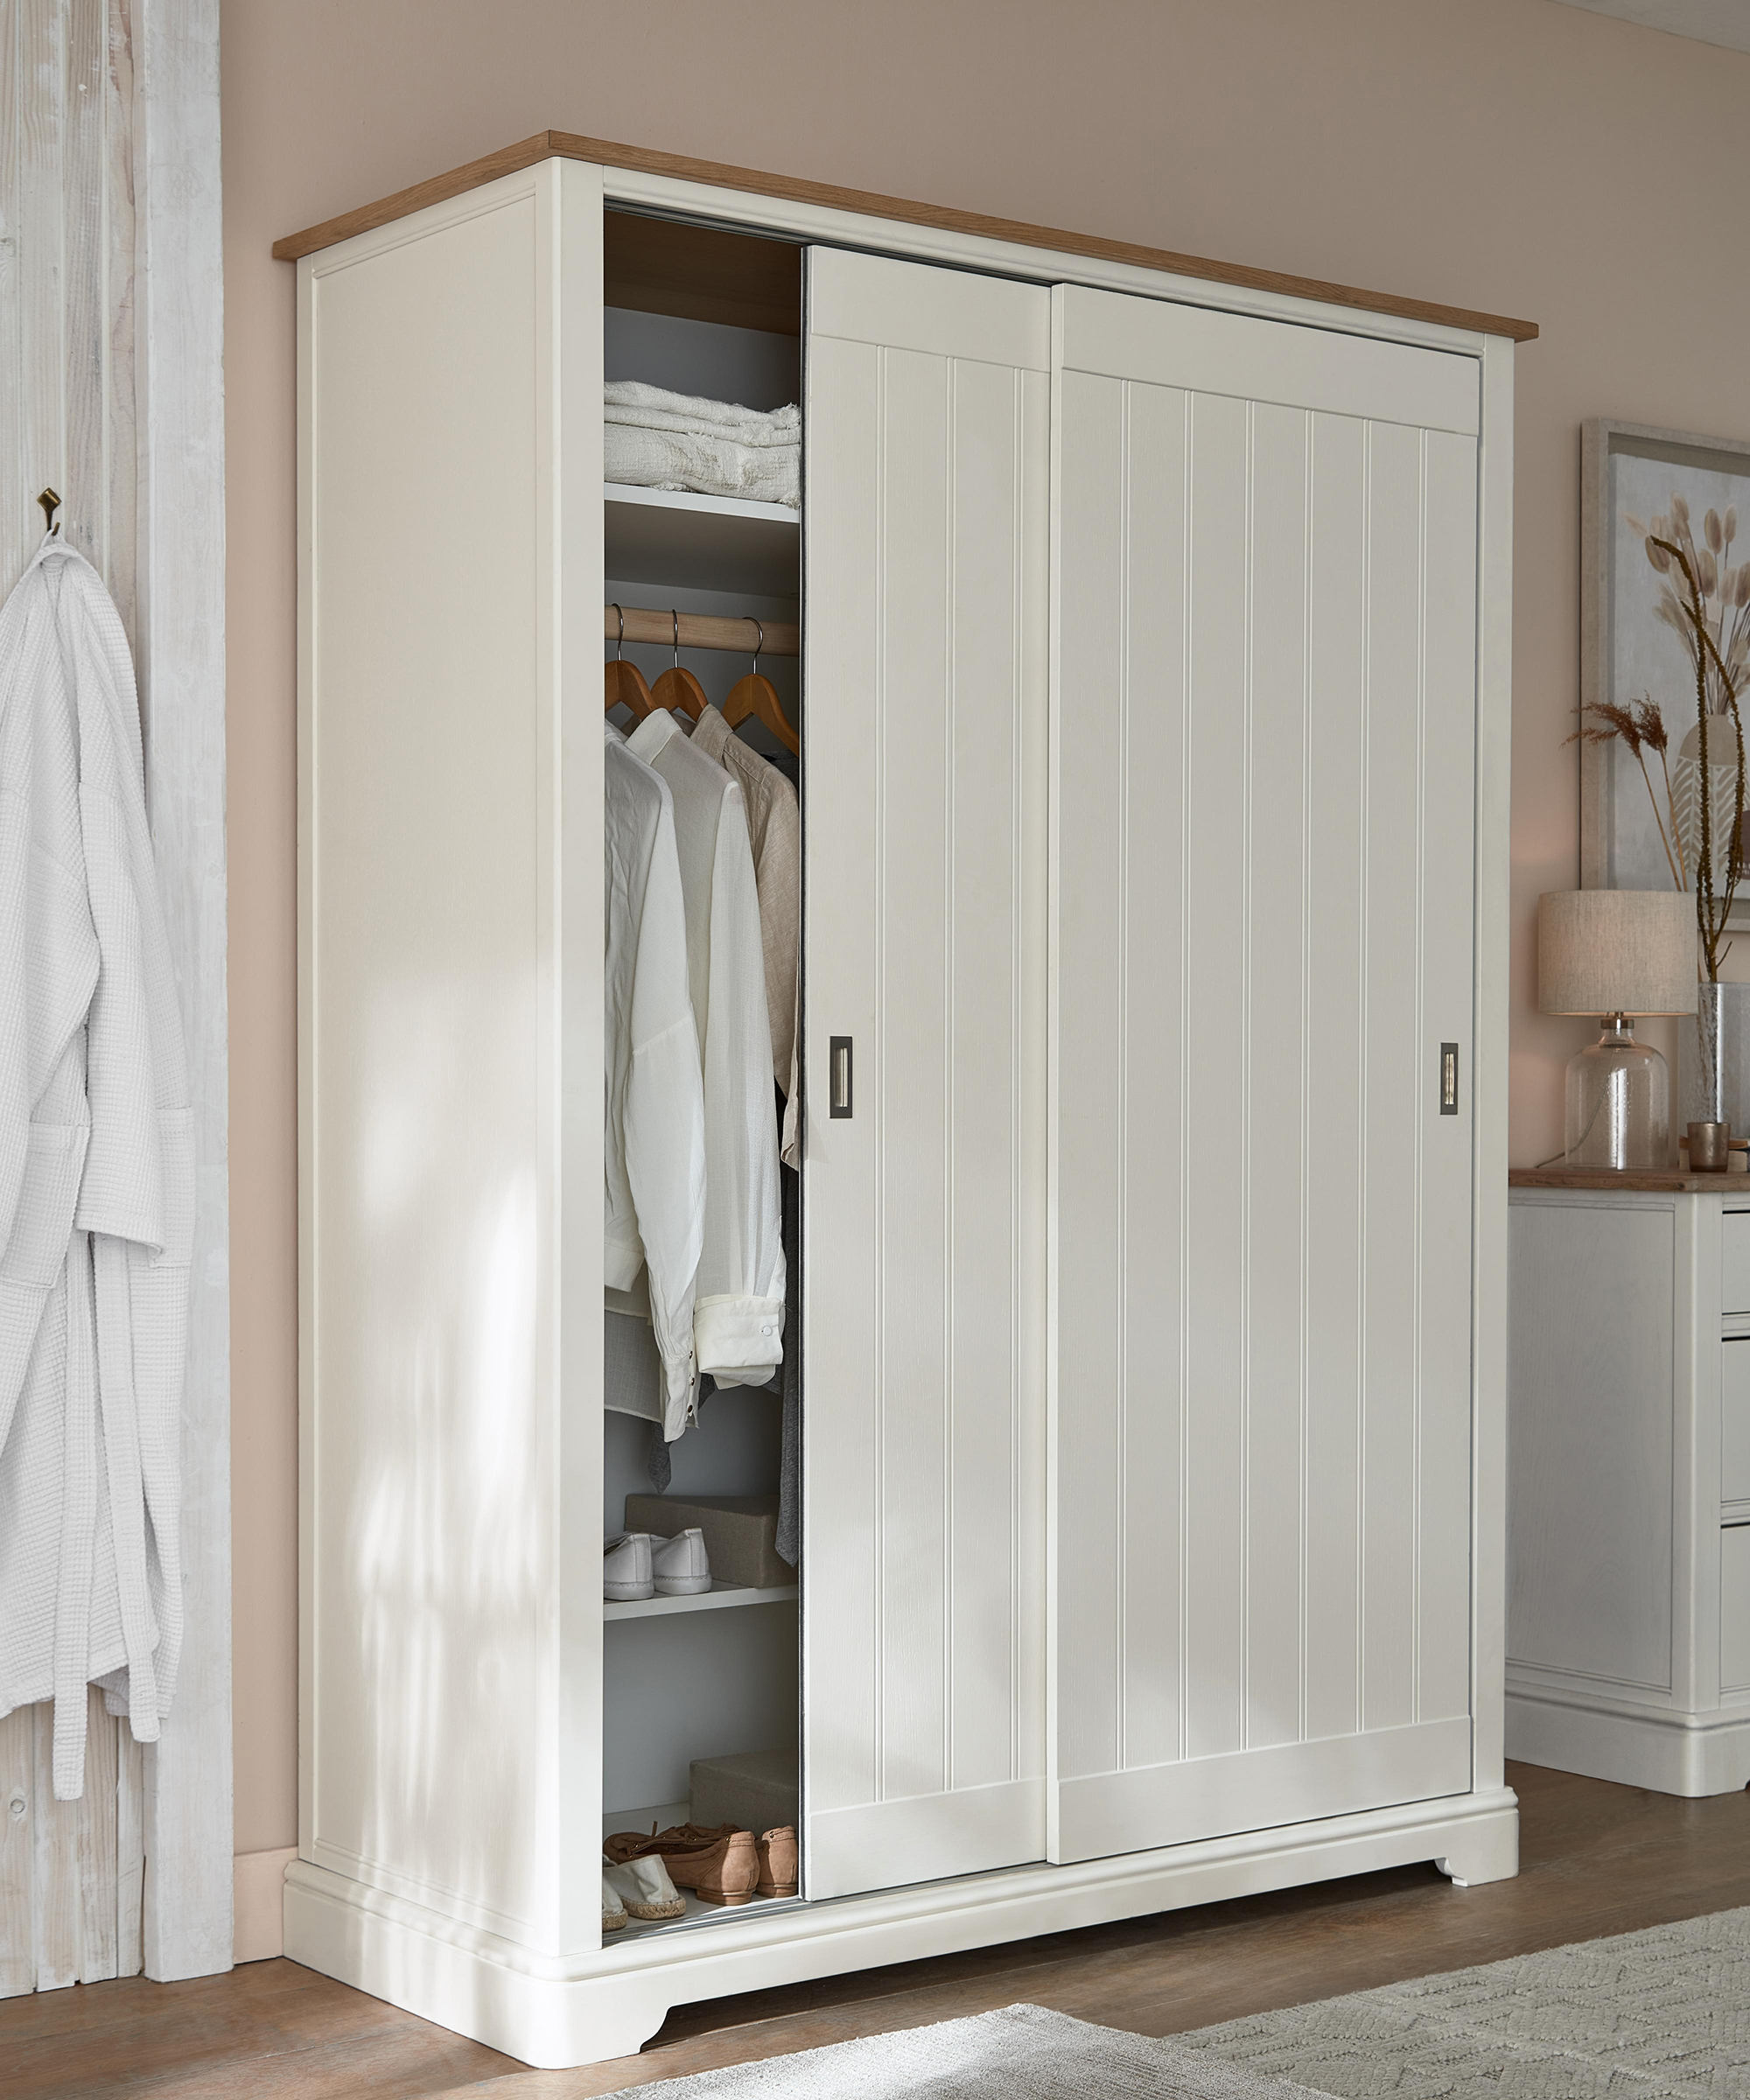 A white master closet wardrobe by Next with shiplap style detail